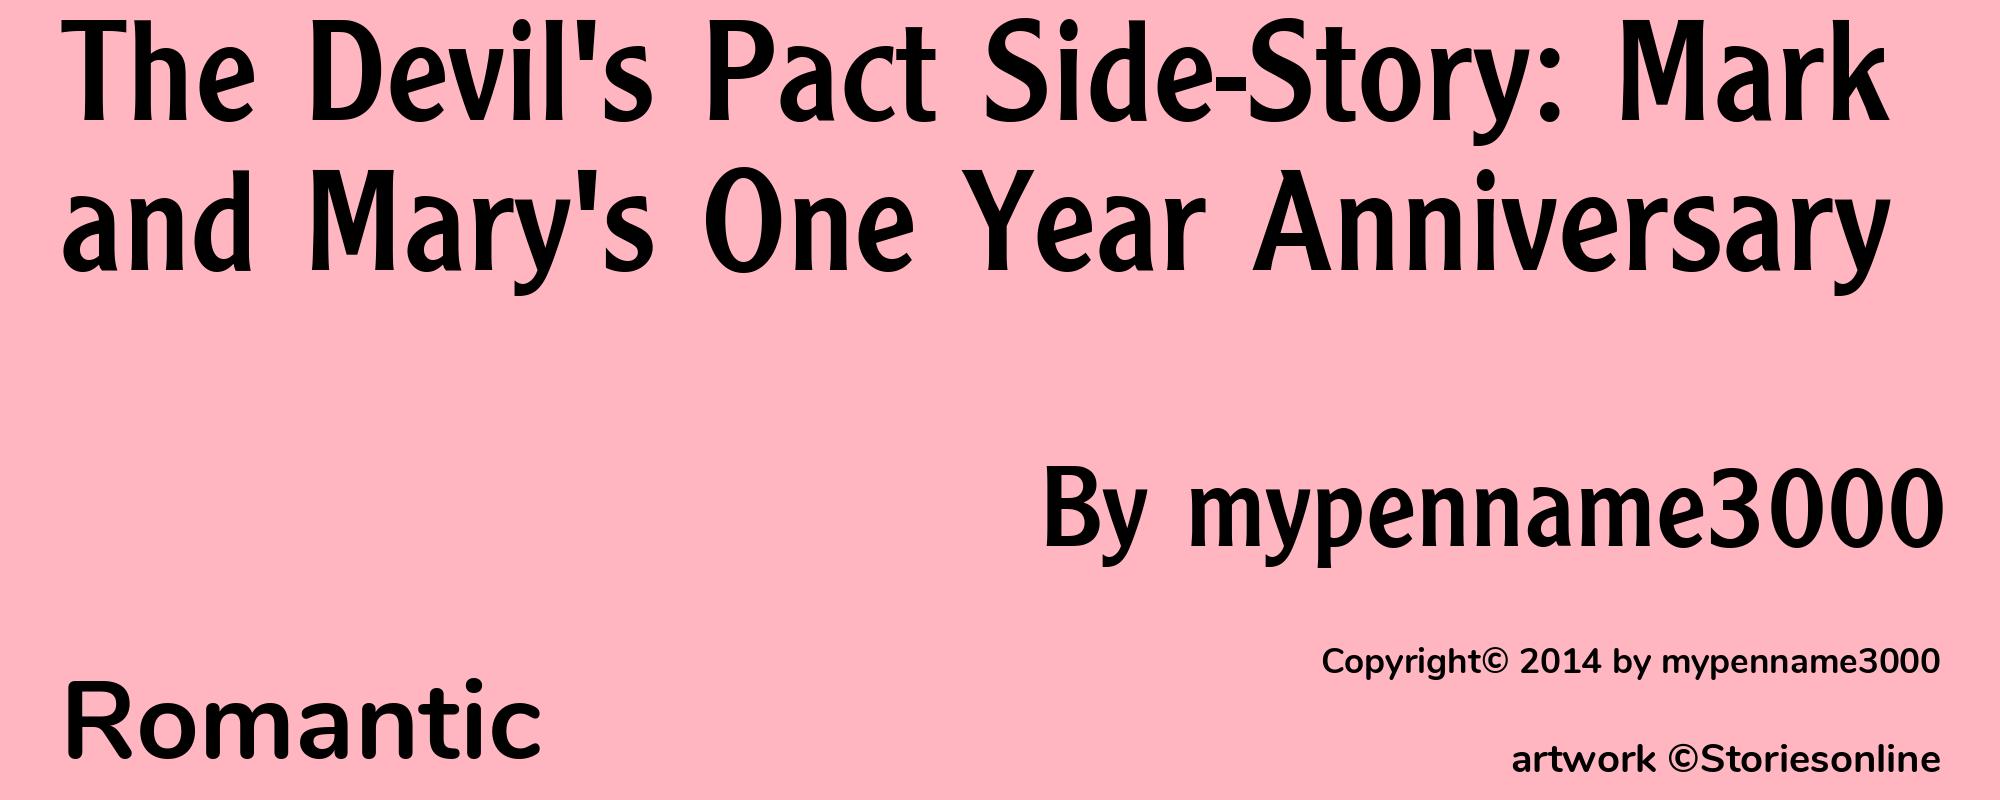 The Devil's Pact Side-Story: Mark and Mary's One Year Anniversary - Cover